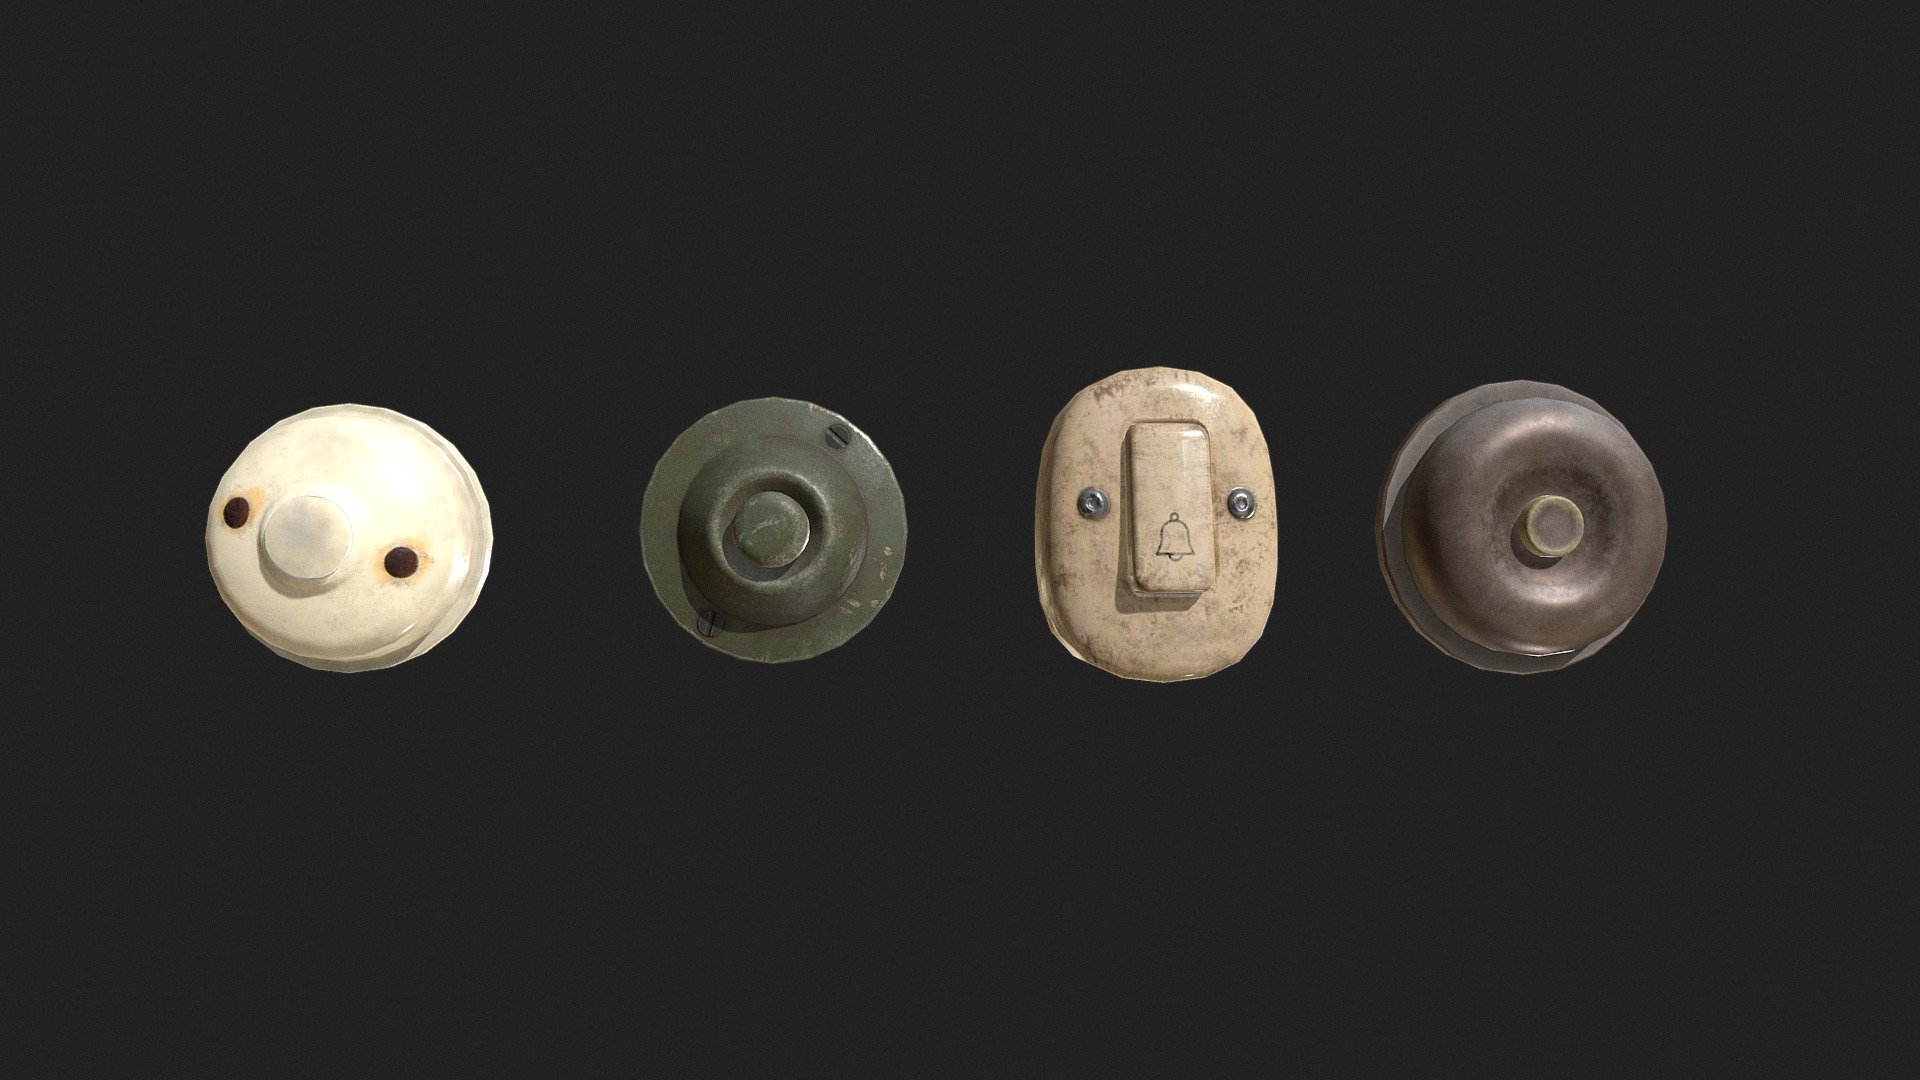 A pack containing 4 door bells.

2048x2048 texture packs (PBR Metal Rough, Unity HDRP, Unity Standard Metallic and UE4):

PBR Metal Rough: BaseColor, AO, Height, Normal, Roughness and Metallic;

Unity HDRP: BaseColor, MaskMap, Normal;

Unity Standard Metallic: AlbedoTransparency, MetallicSmoothness, Normal;

Unreal Engine 4: BaseColor, Normal, OcclusionRoughnessMetallic;

The package also has the .fbx, .obj, .stl, .dae and .blend file 3d model